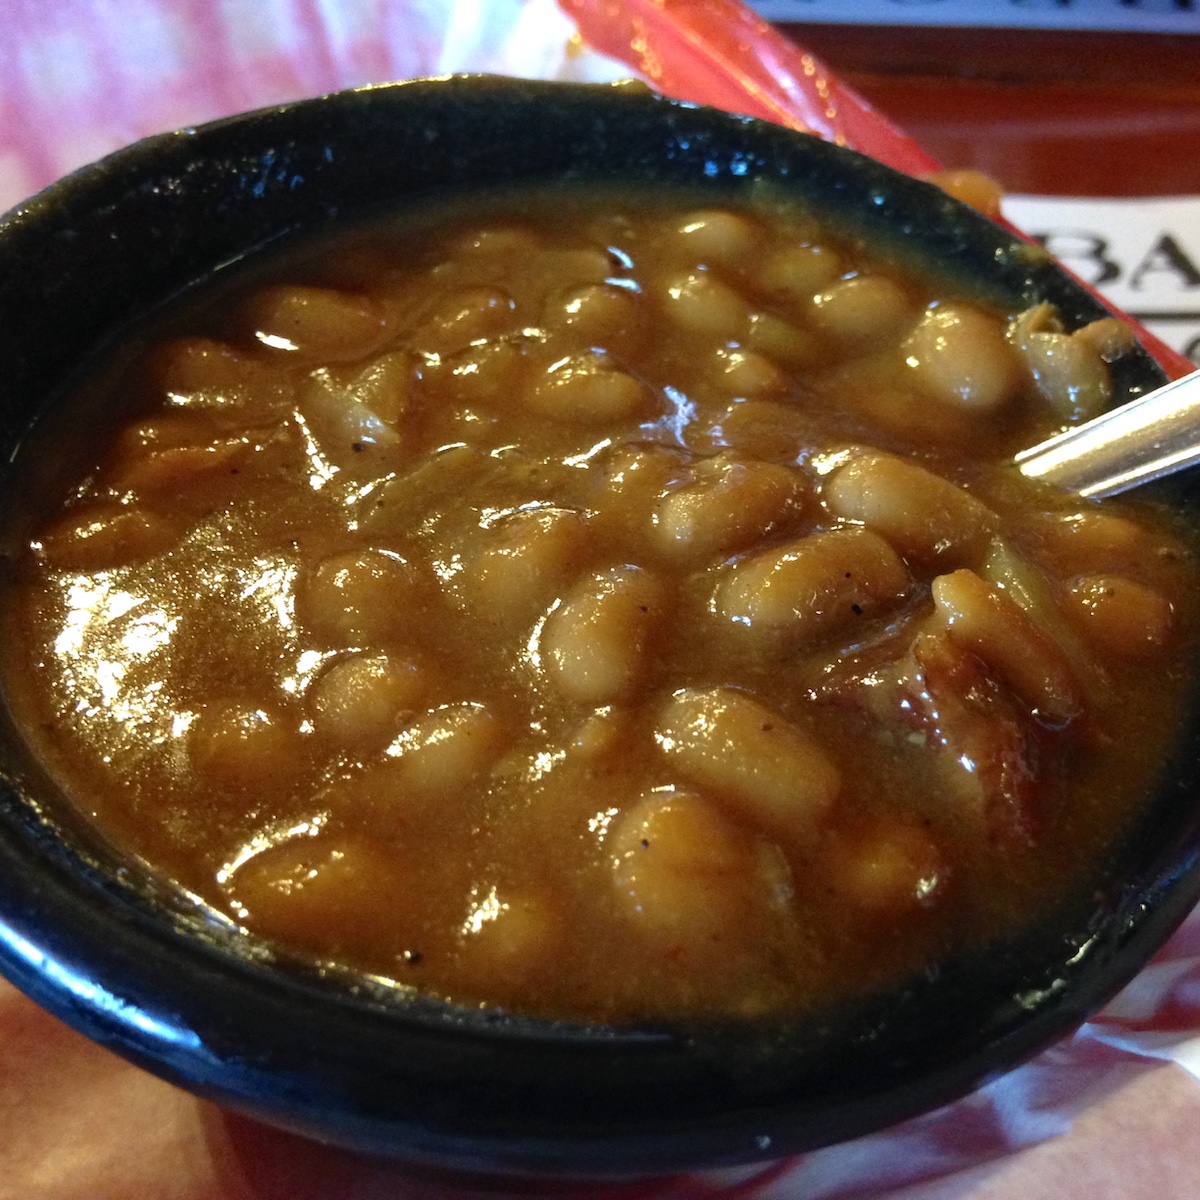 BBQ Beans from Shiver's BBQ in Homestead, Florida